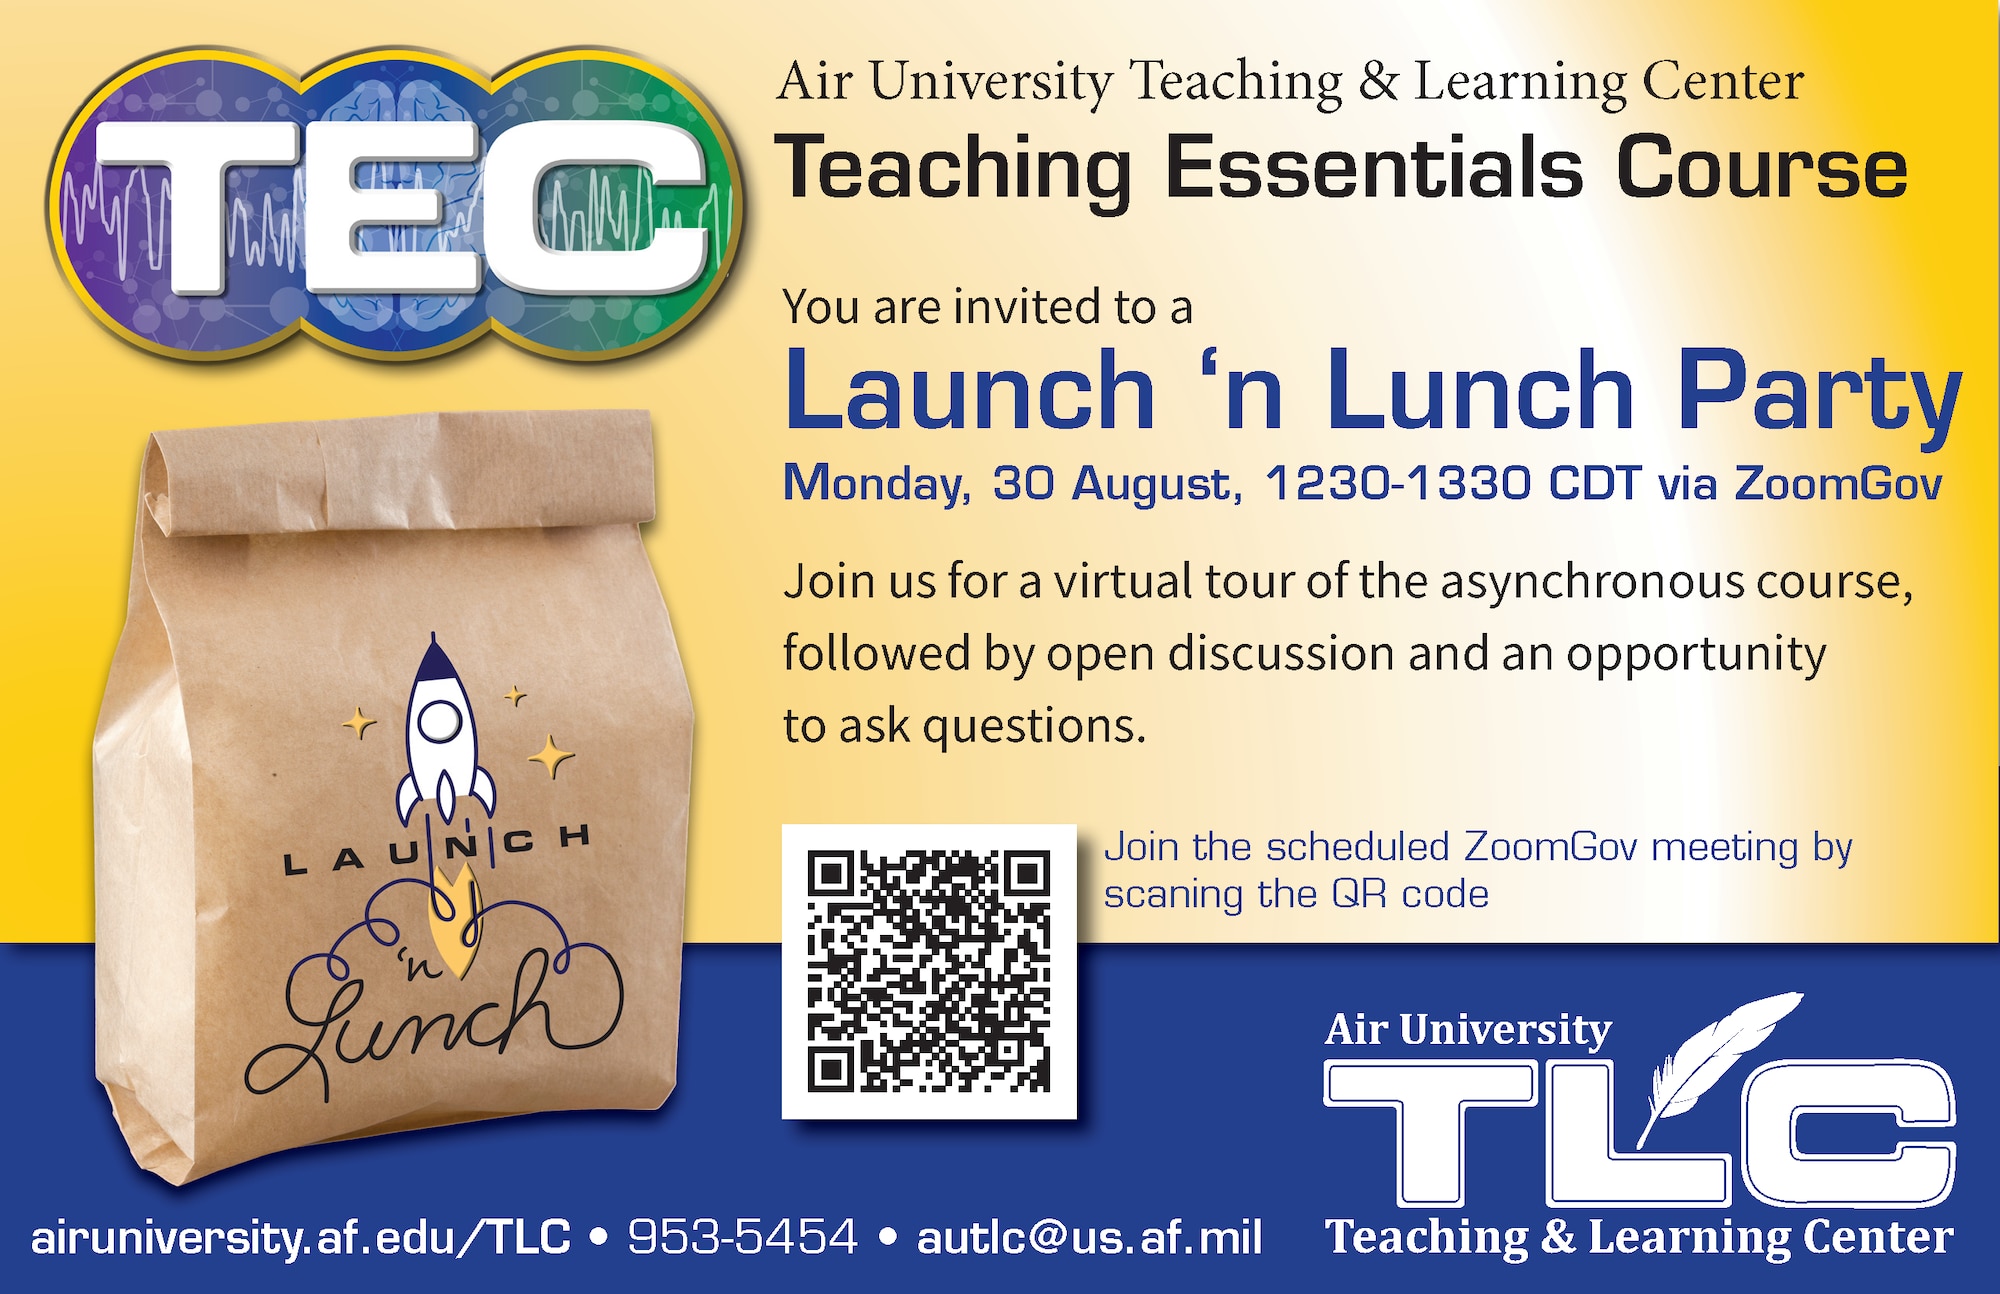 The Air University Teaching and Learning Center launches a completely online, self-paced Teaching Essentials Course open to all educators at AU and Air Education and Training Command on Aug. 30, 2021.